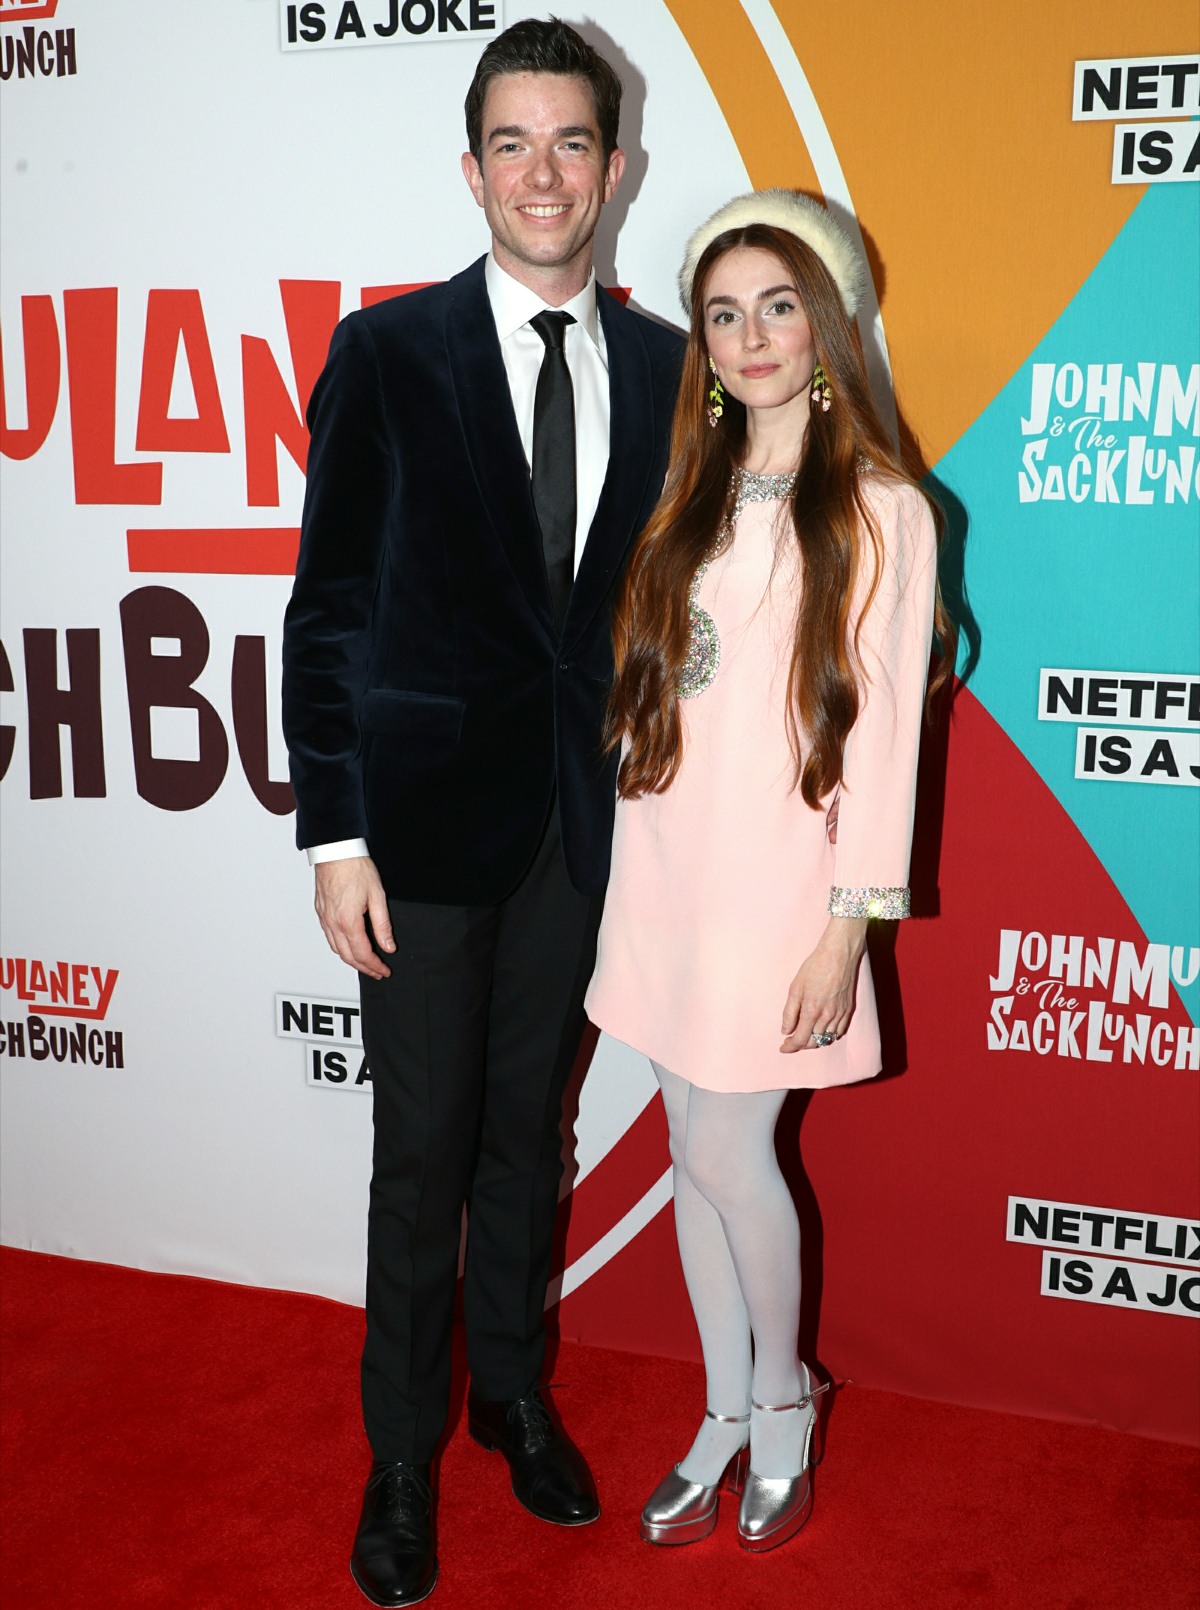 John Mulaney & The Sack Lunch Bunch NY Special Screening